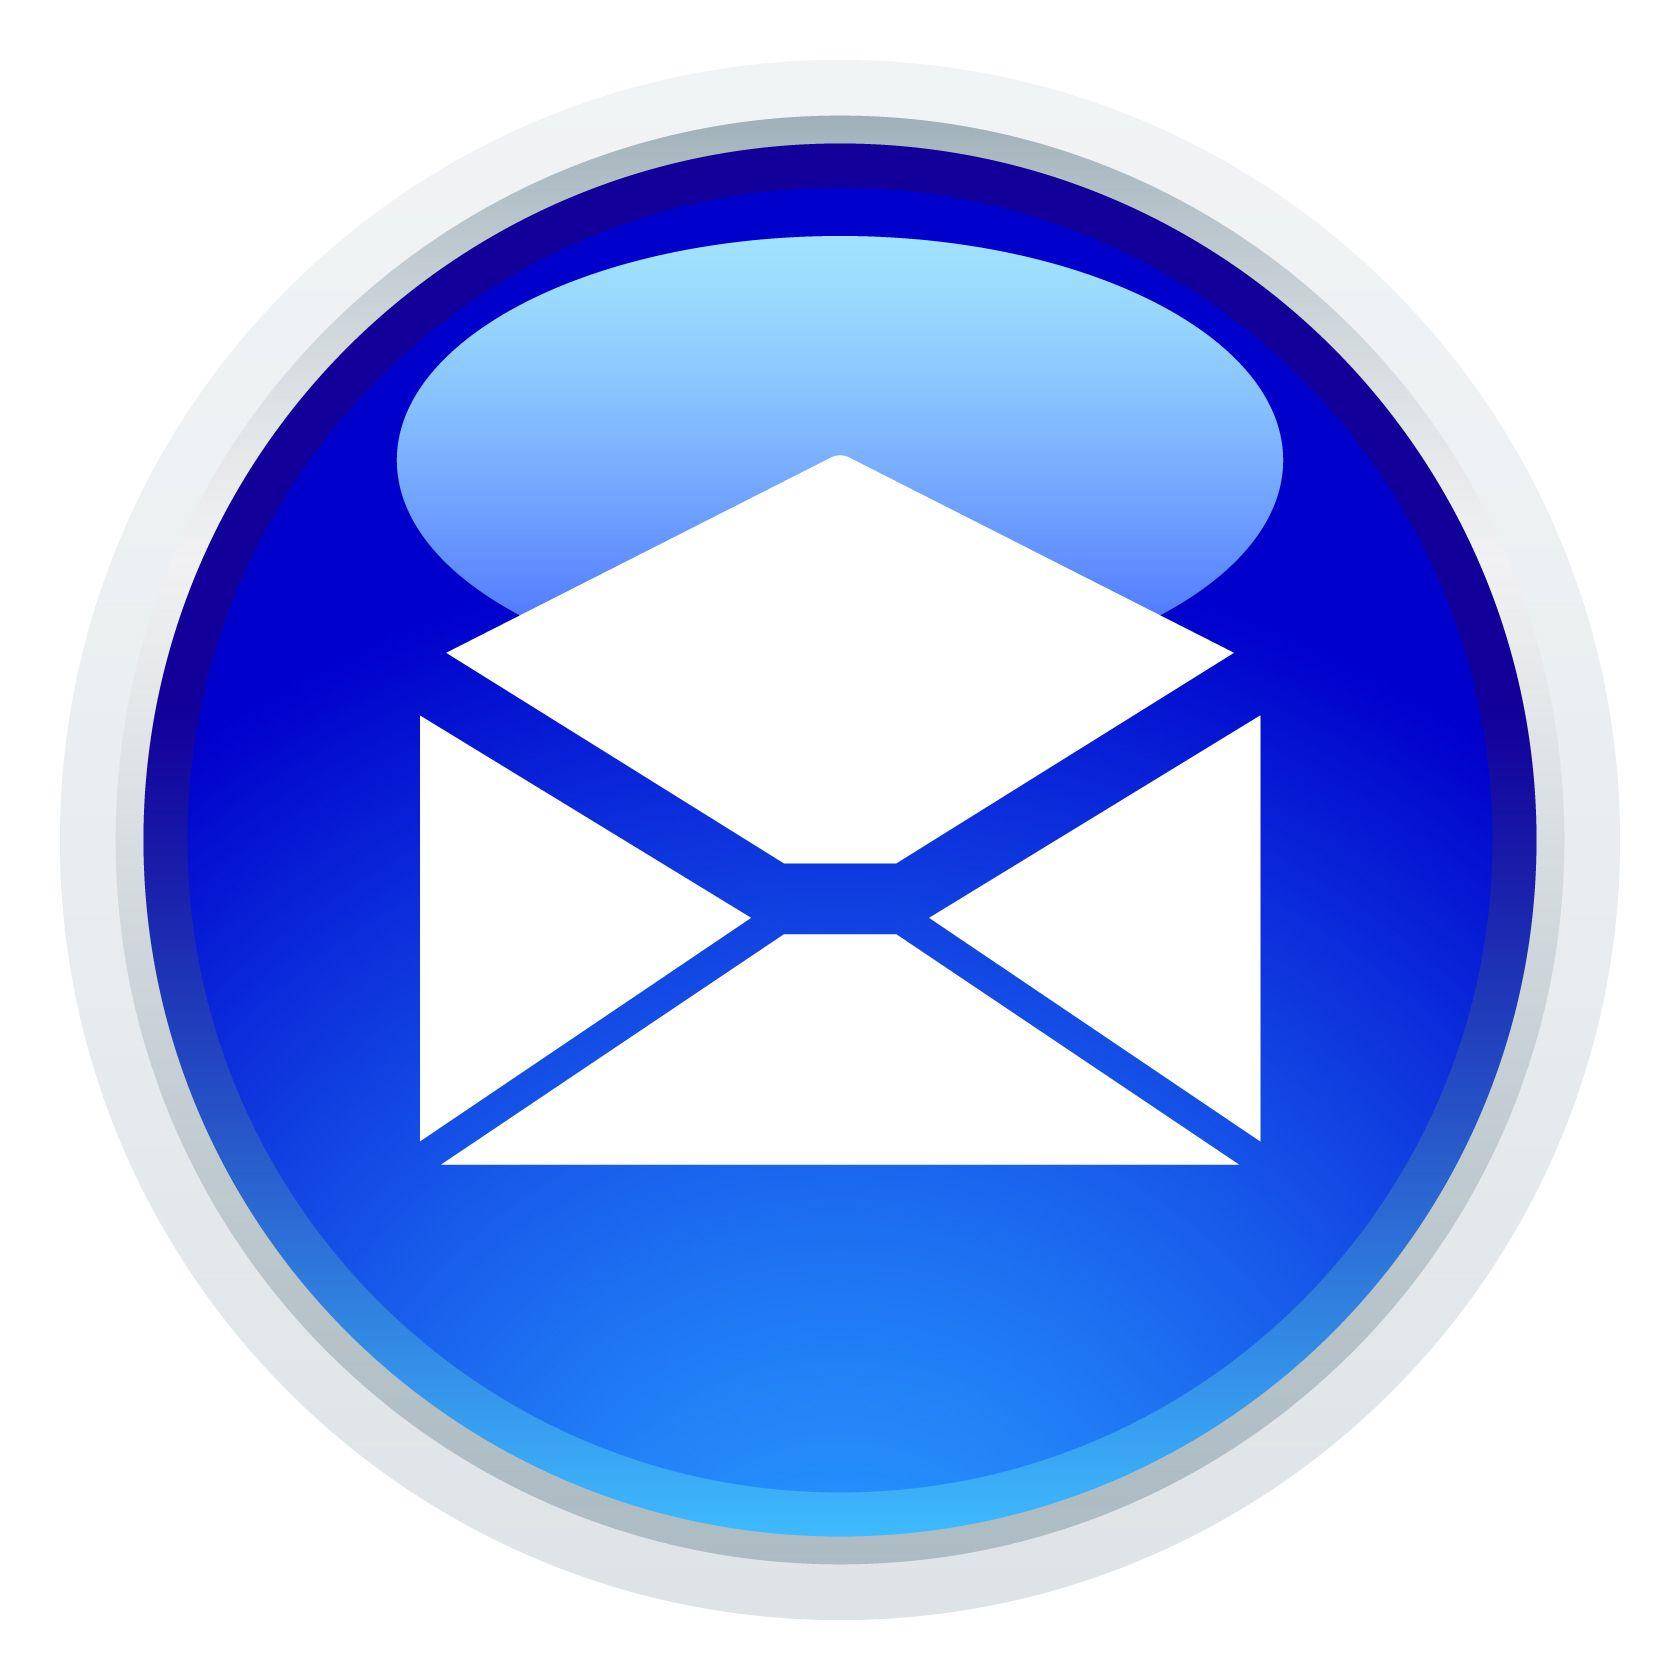 Office Email Logo - New Microsoft Office 365 email system announced | Announce ...